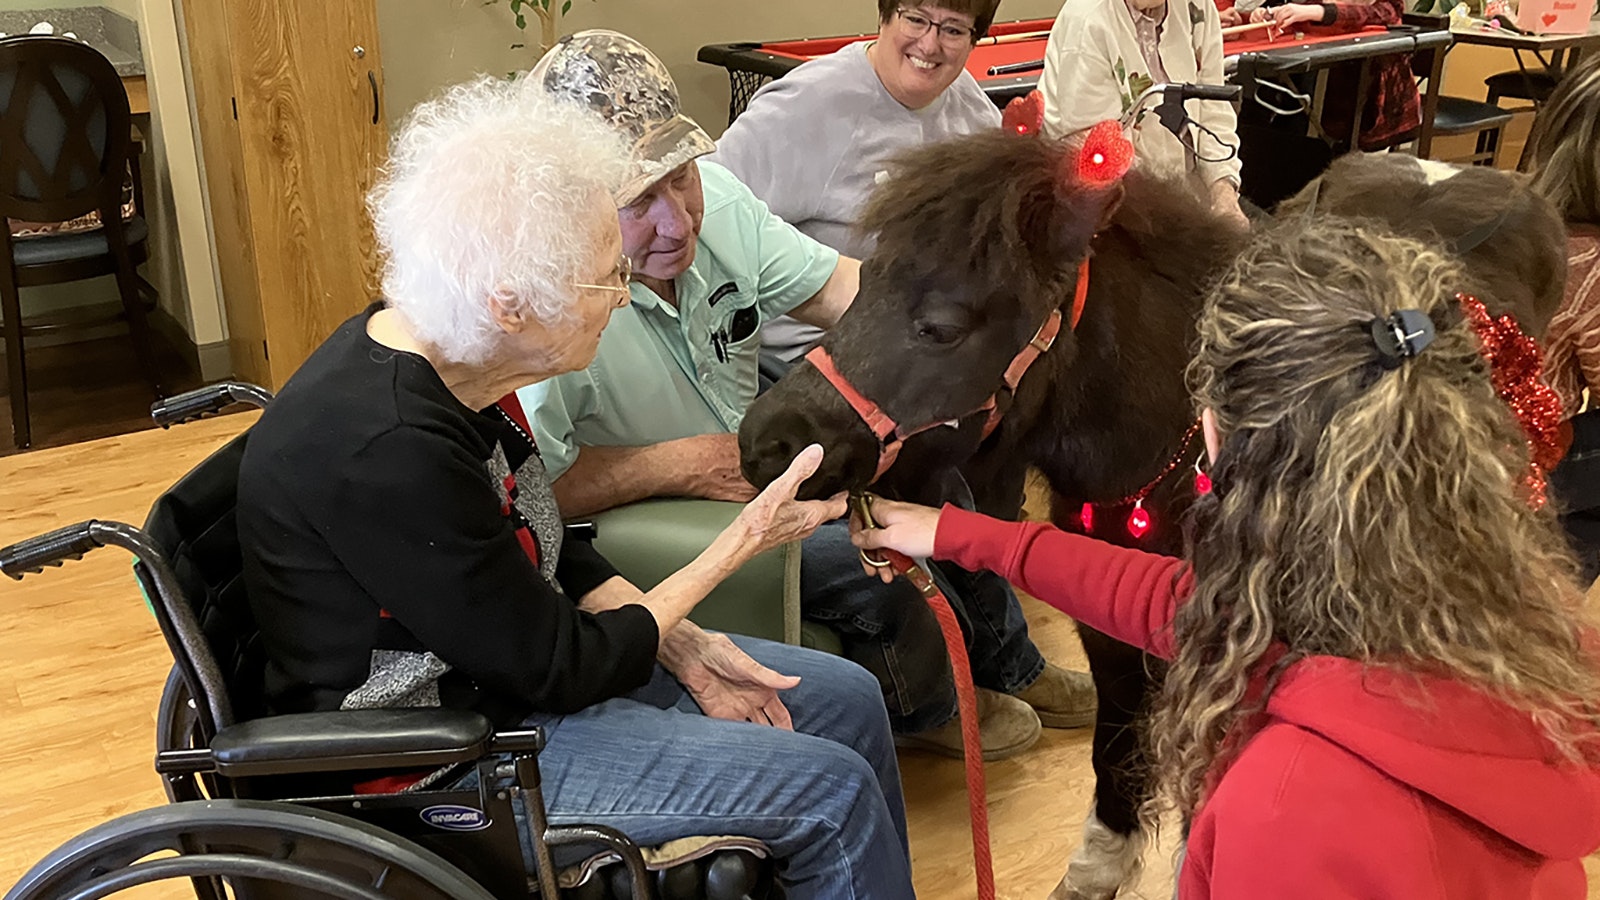 Amie Holt Care Center resident Beverly Landrey joked that she was “born” on a horse. The horse lover enjoyed getting some one-on-one time with Chip on Monday.